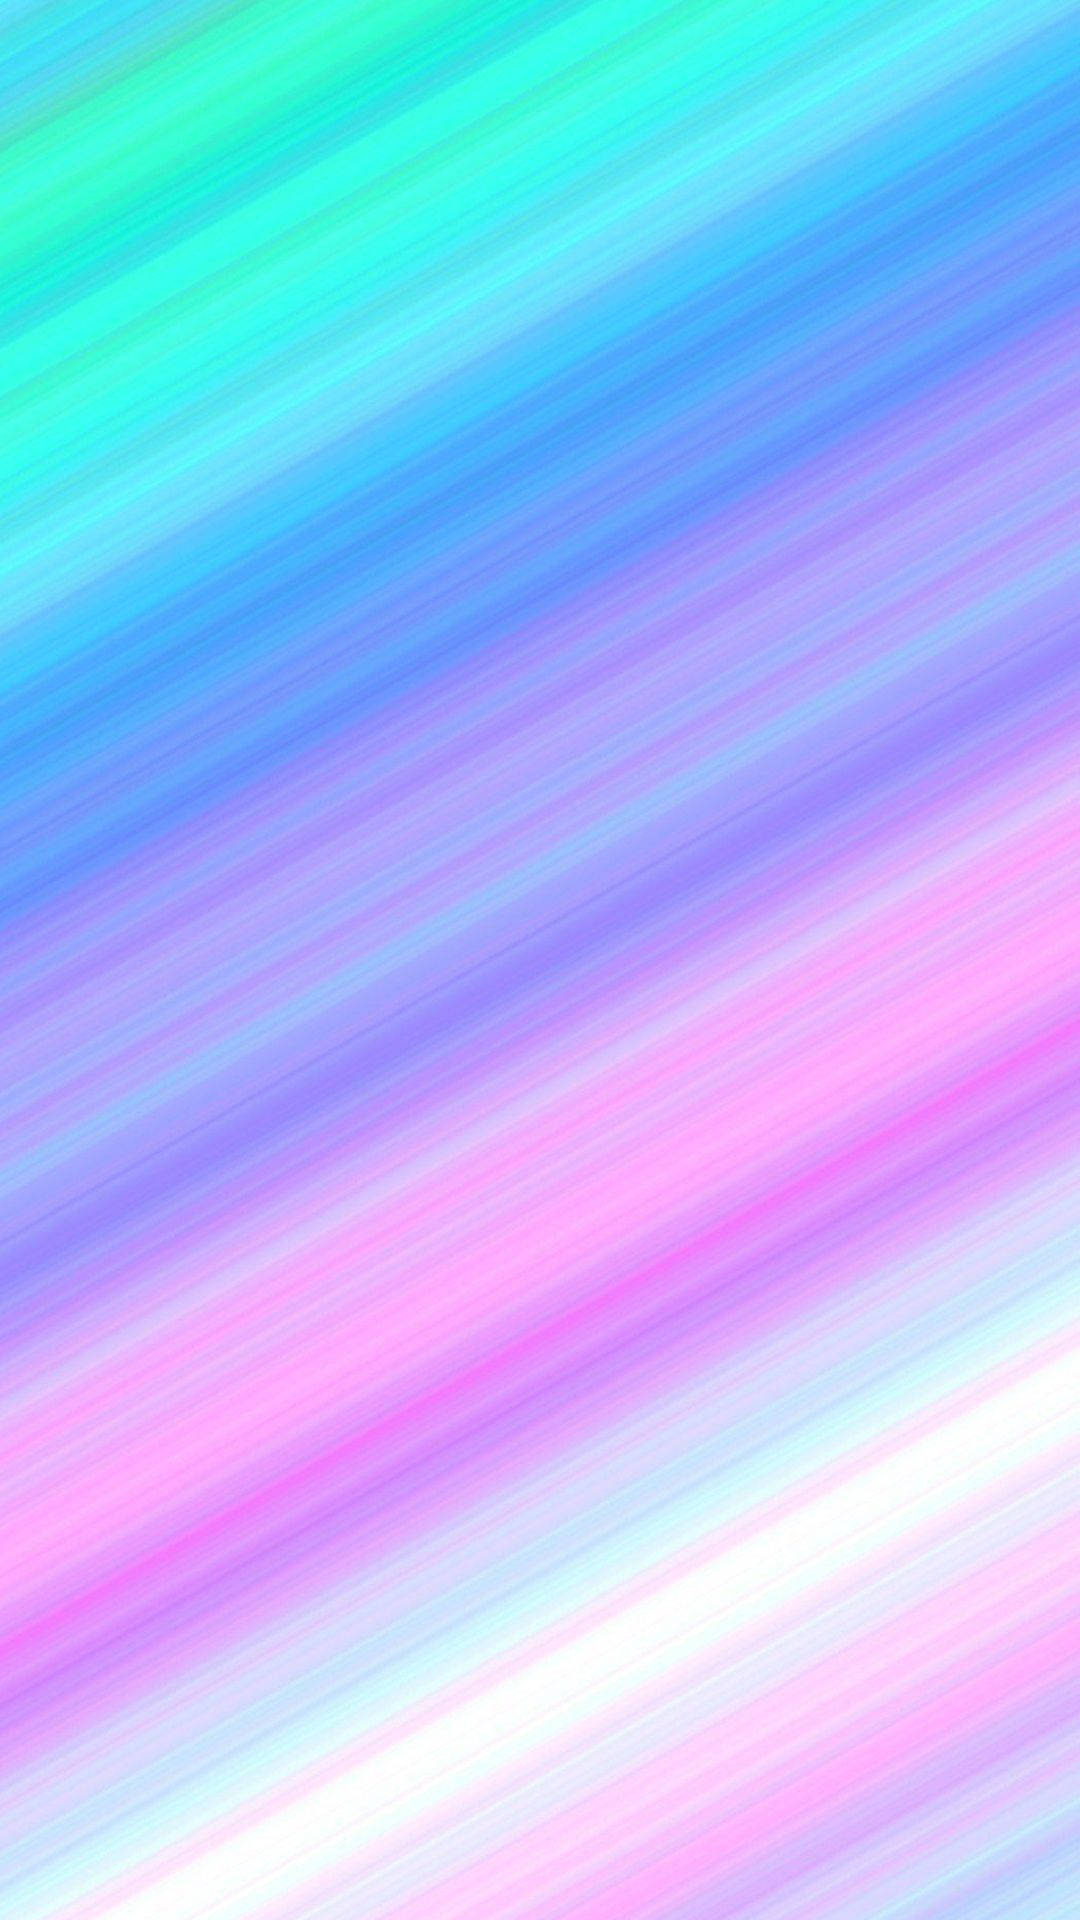 Pastel Colors Of Cute Galaxy Background